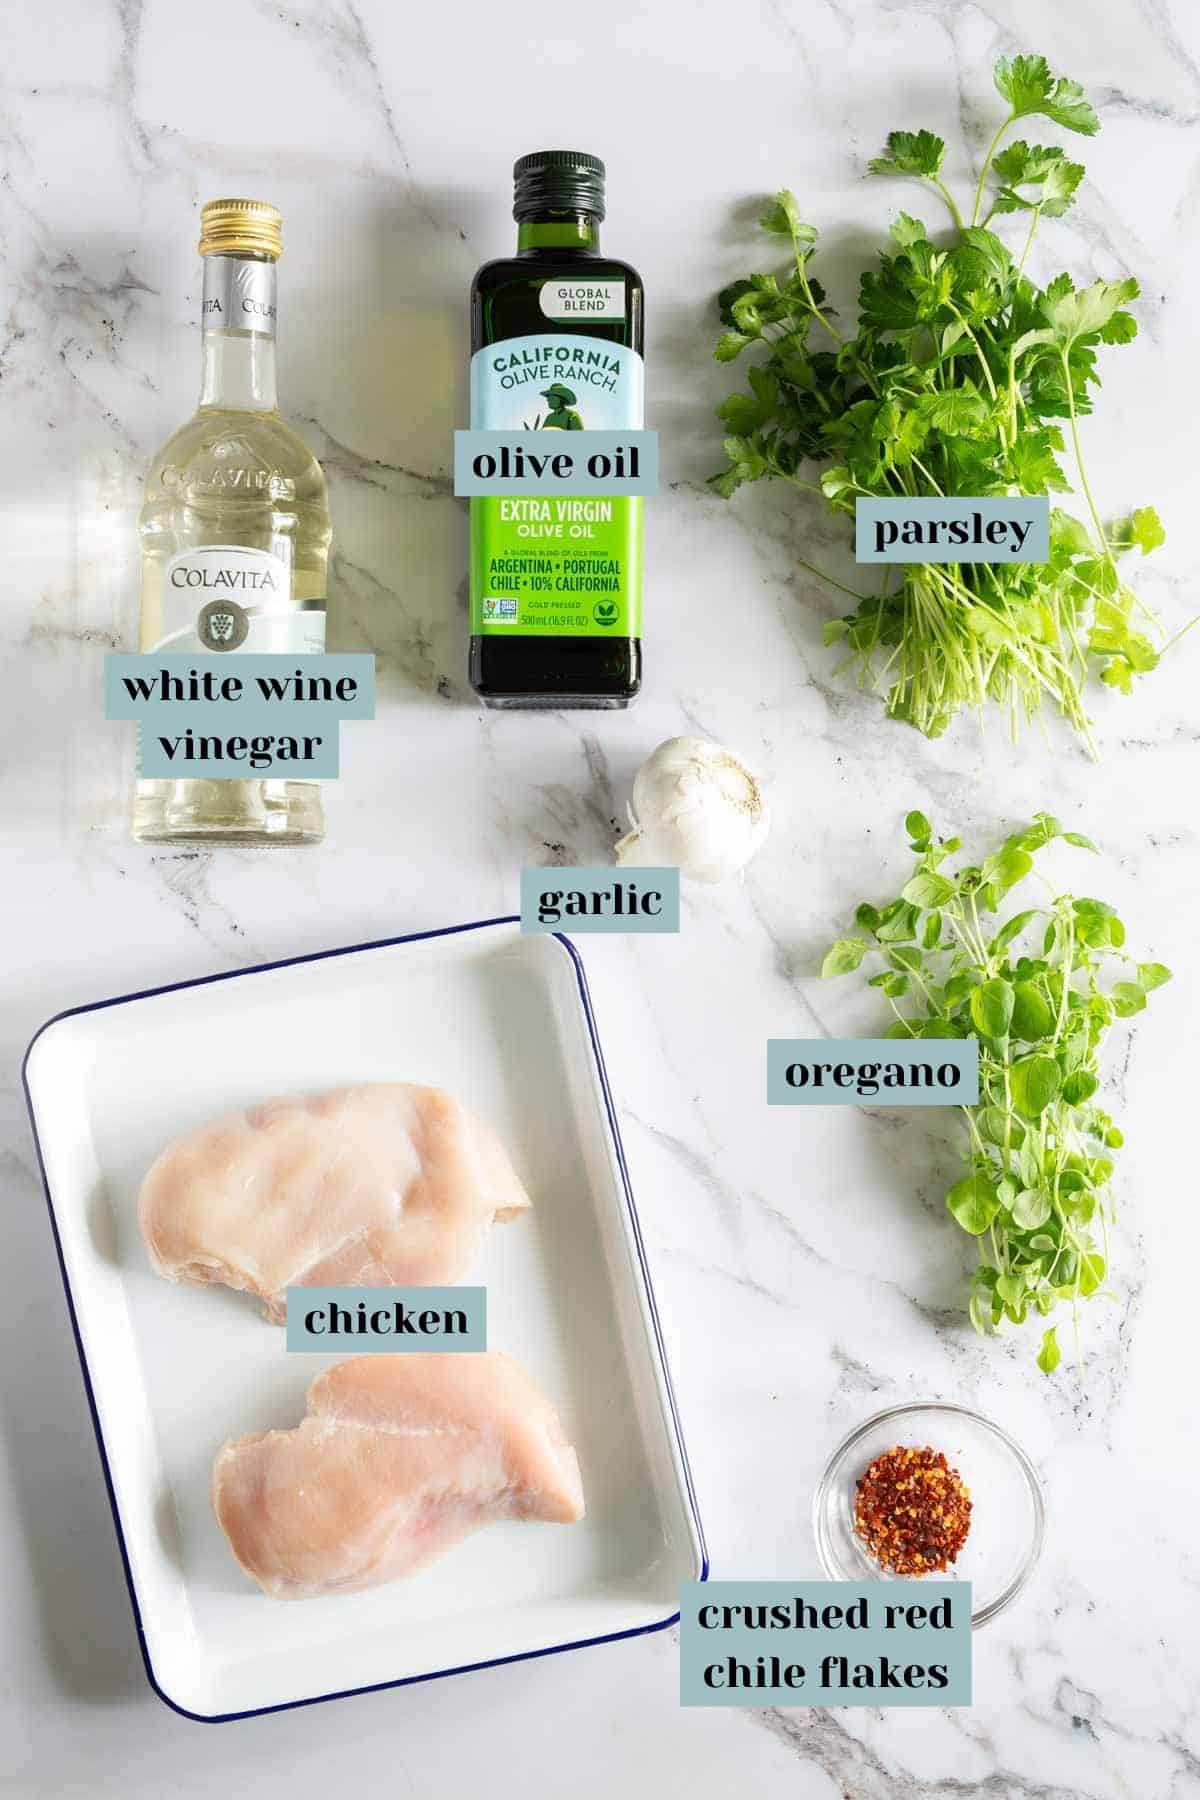 Ingredients for a dish placed on a marble surface, including white wine vinegar, olive oil, parsley, garlic, oregano, raw chicken breast, and crushed red chile flakes.